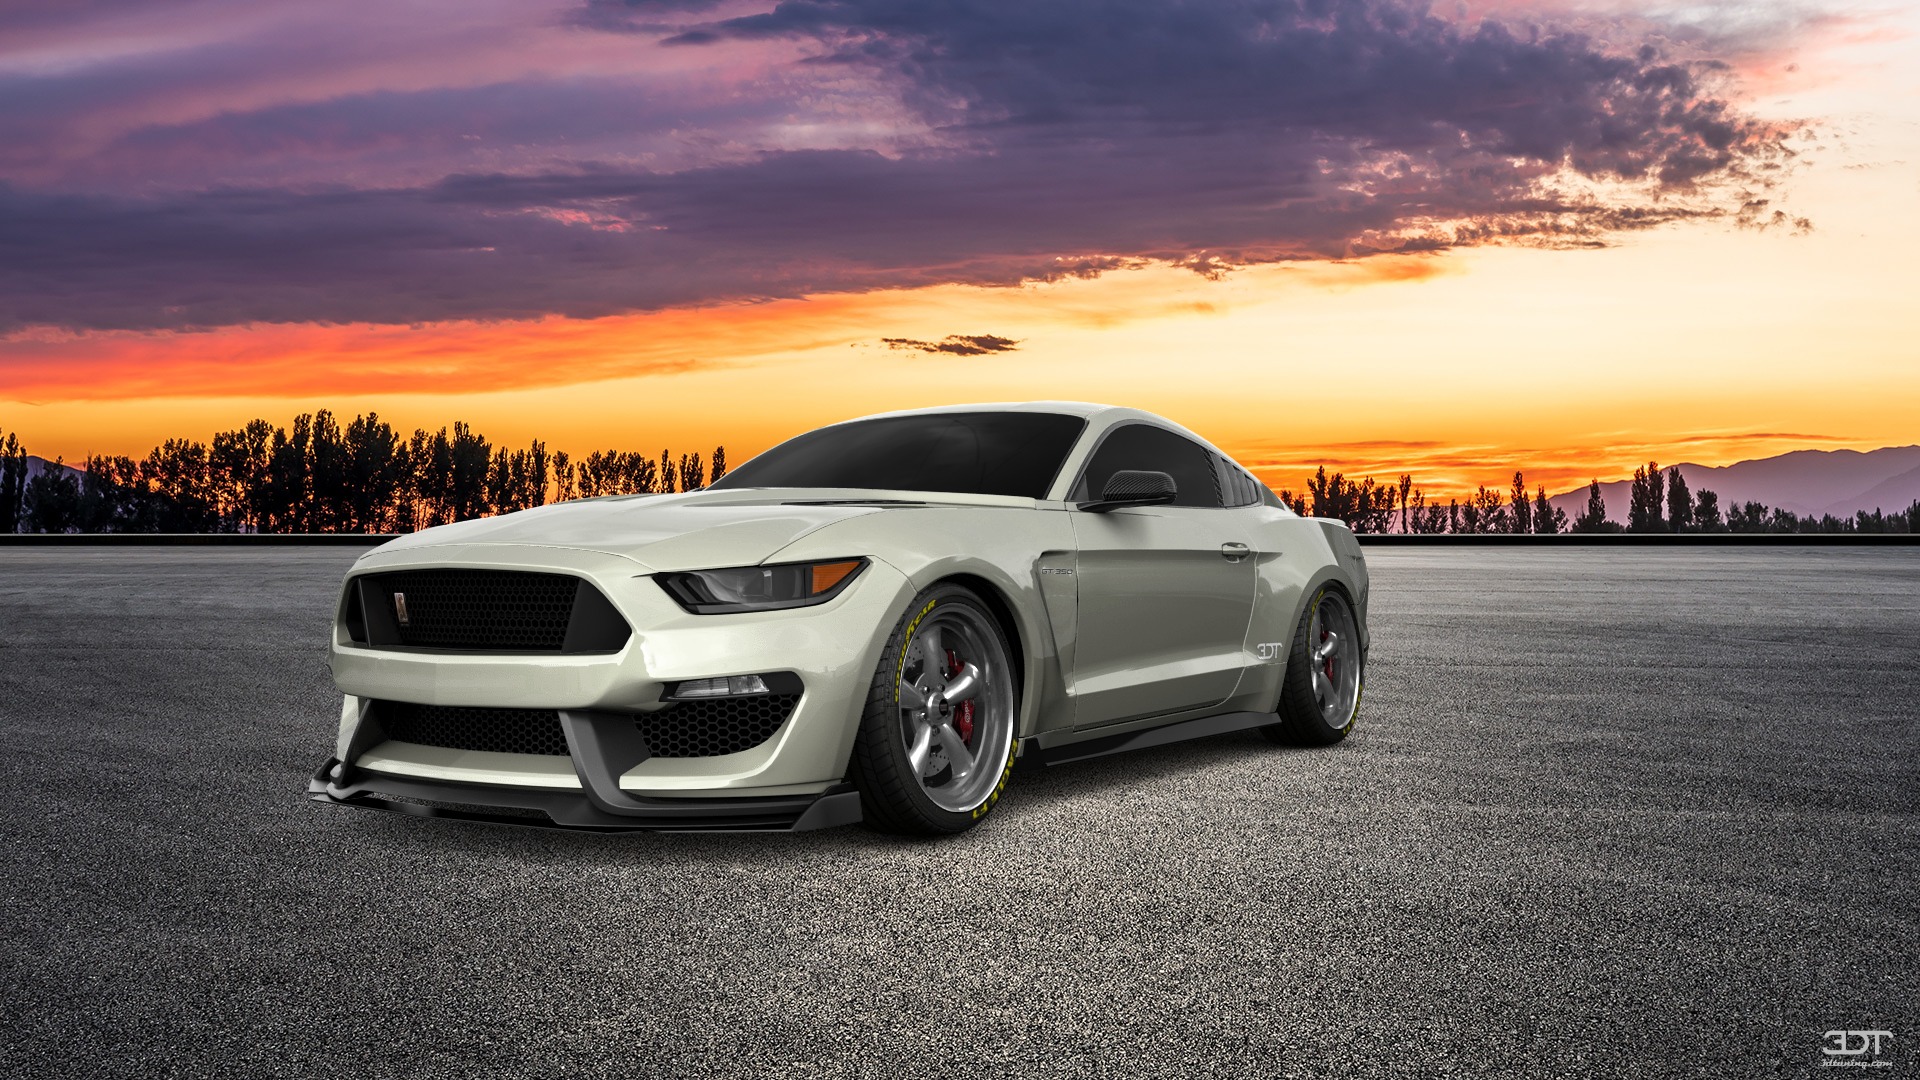 Ford Mustang GT350 2 Door Coupe 2015